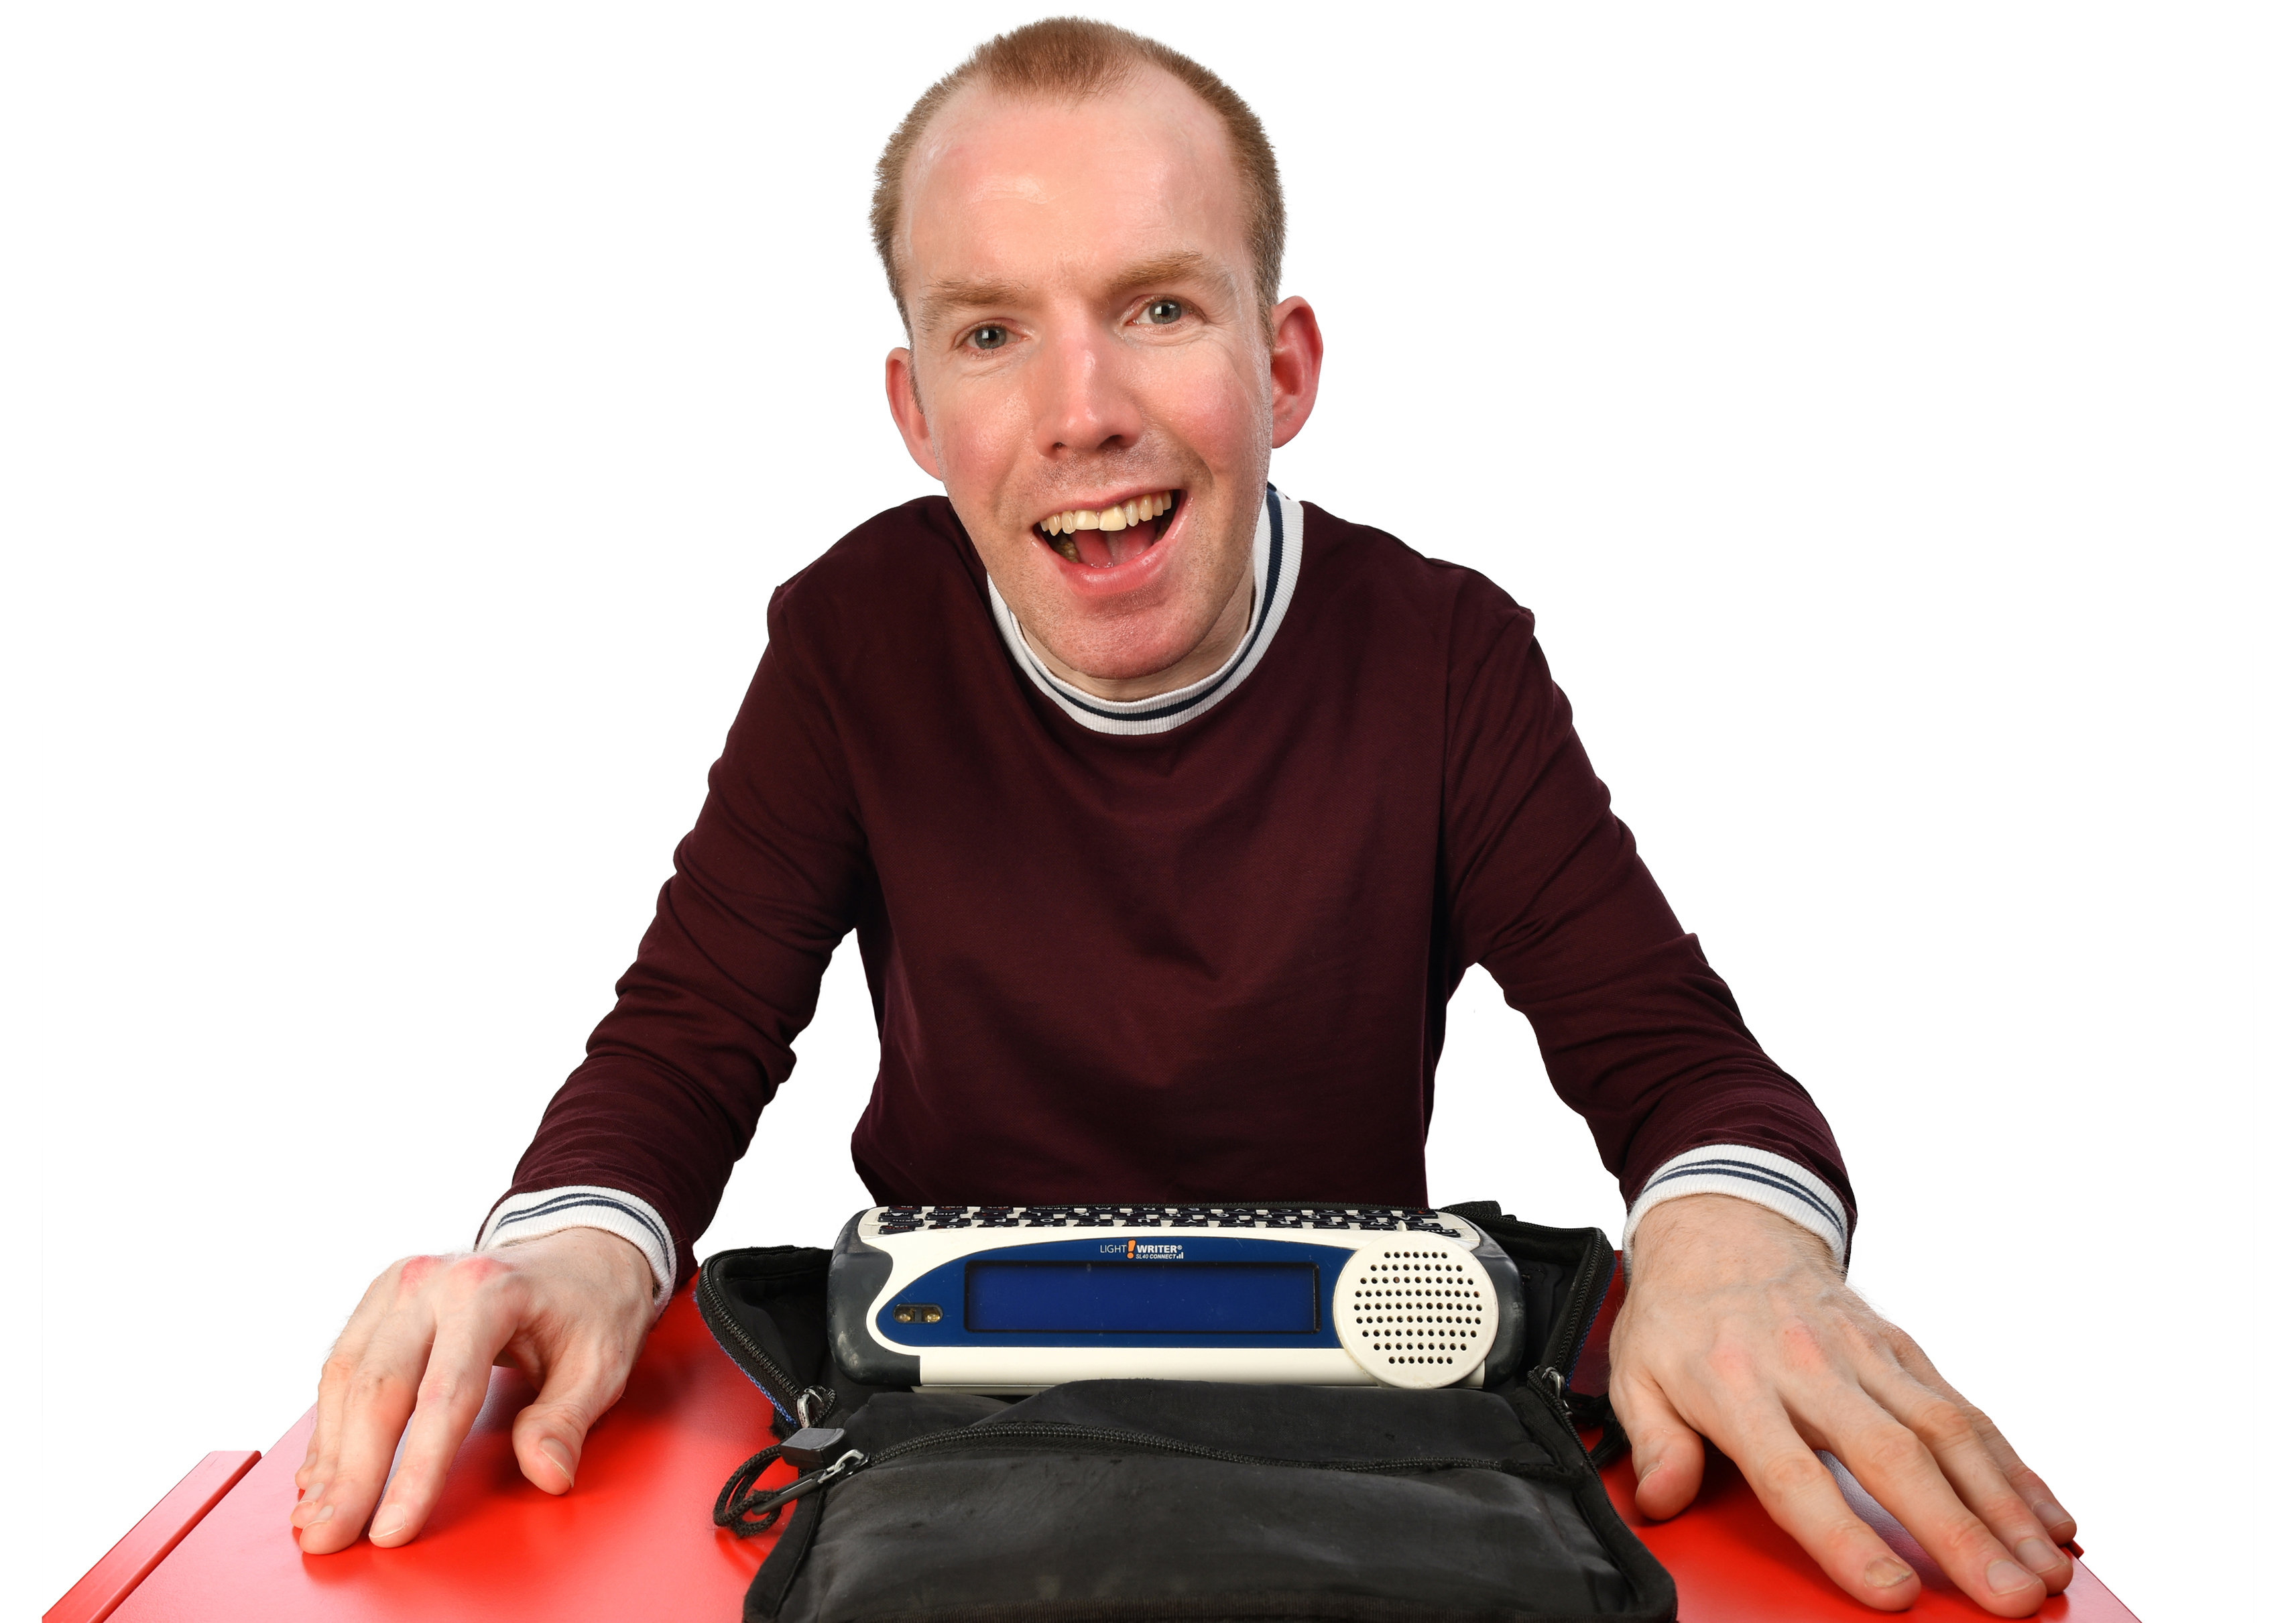 Lee Ridley aka Lost Voice Guy